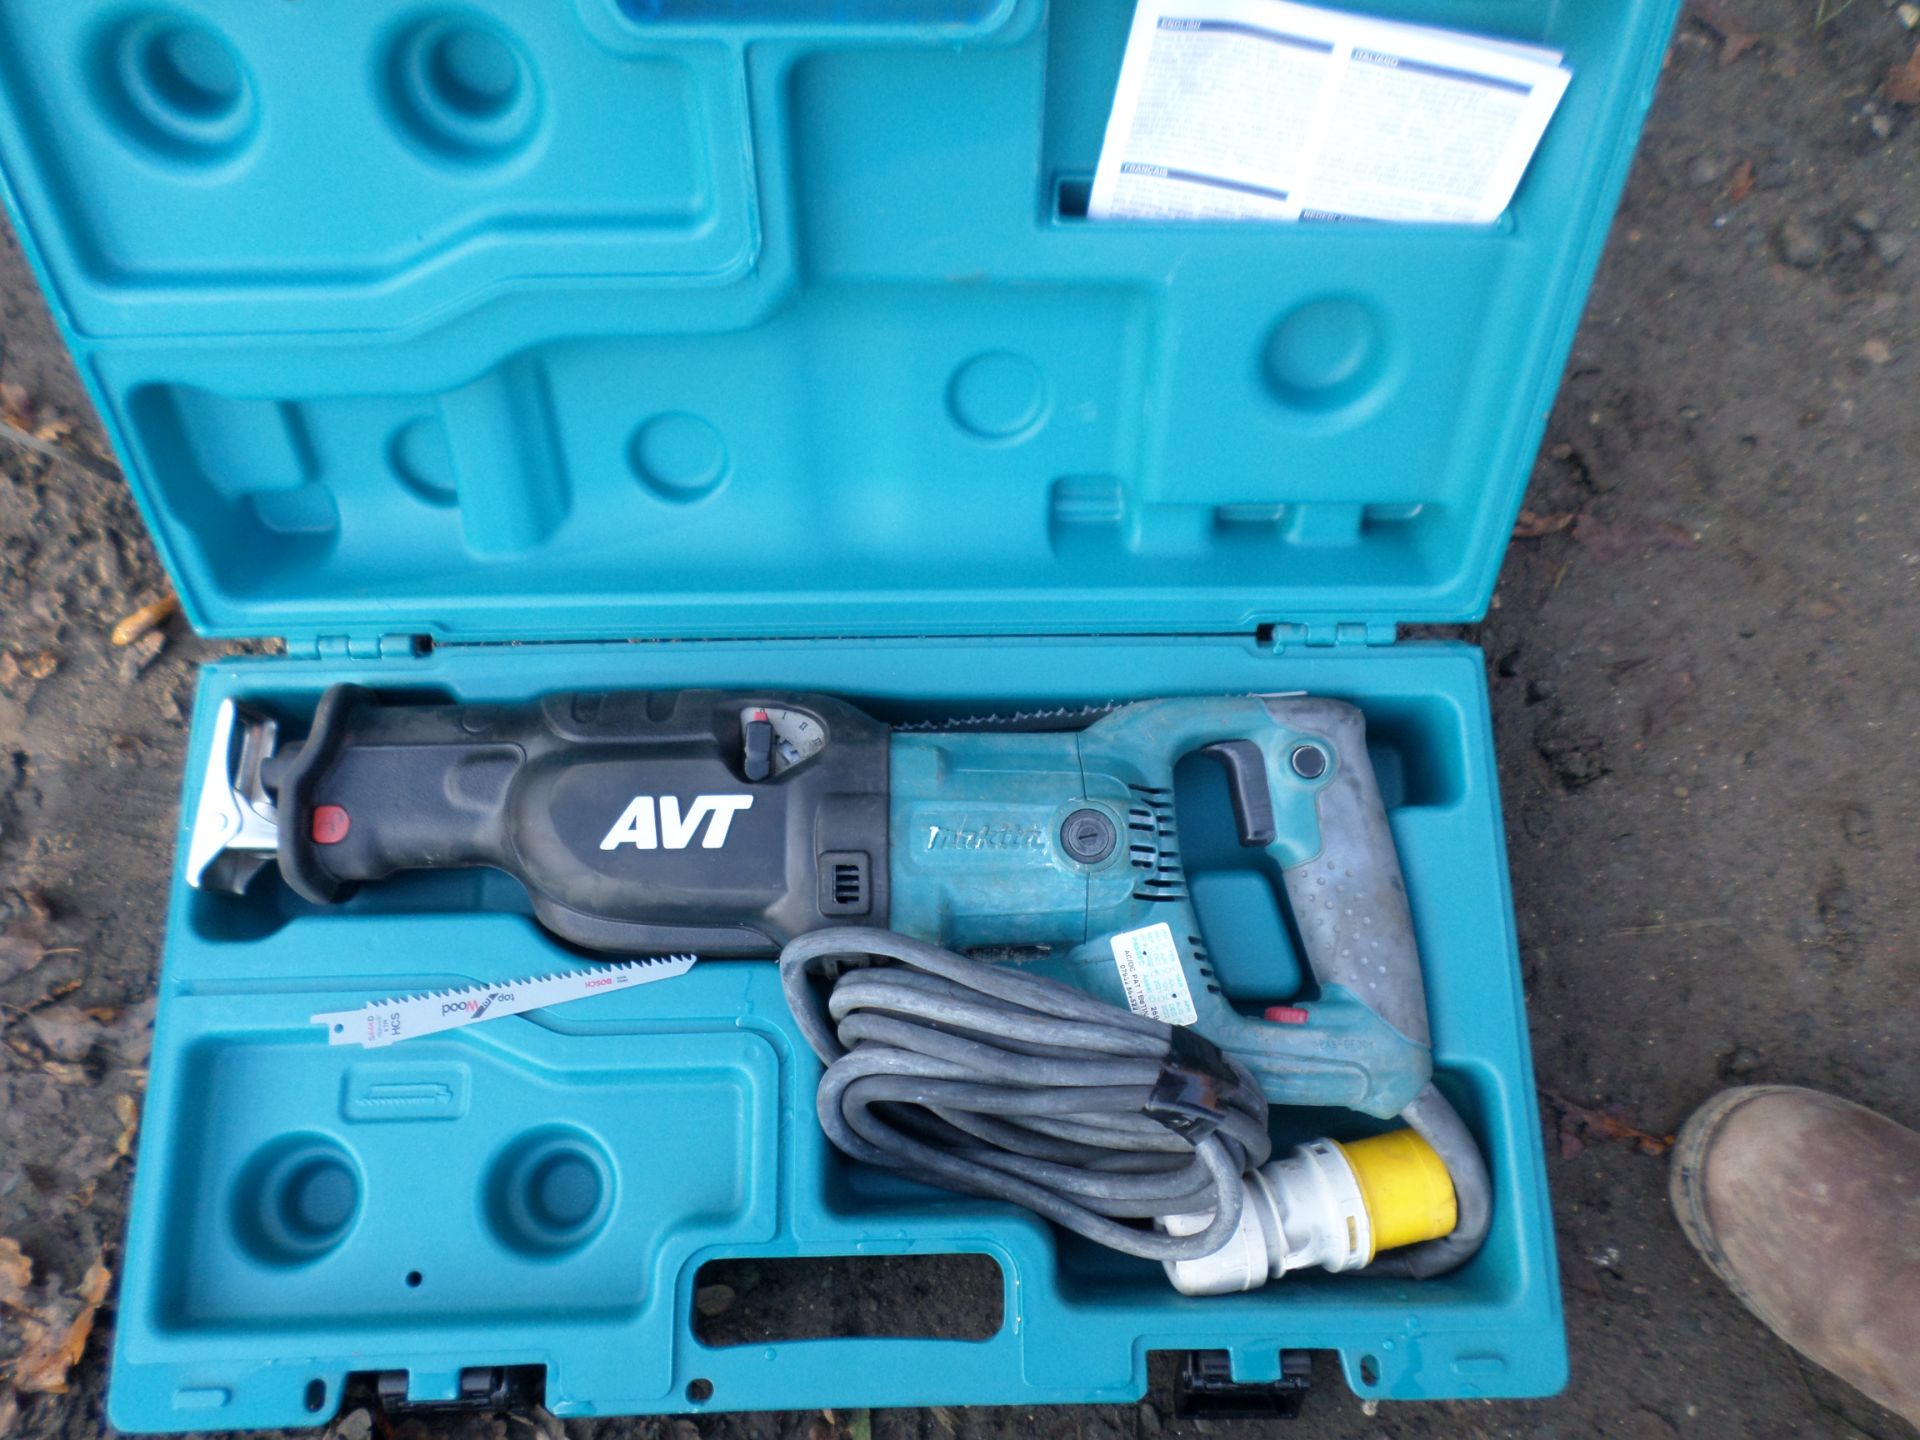 Makita JR3070CT 110v reciprocating saw in carry case with blade NO VAT